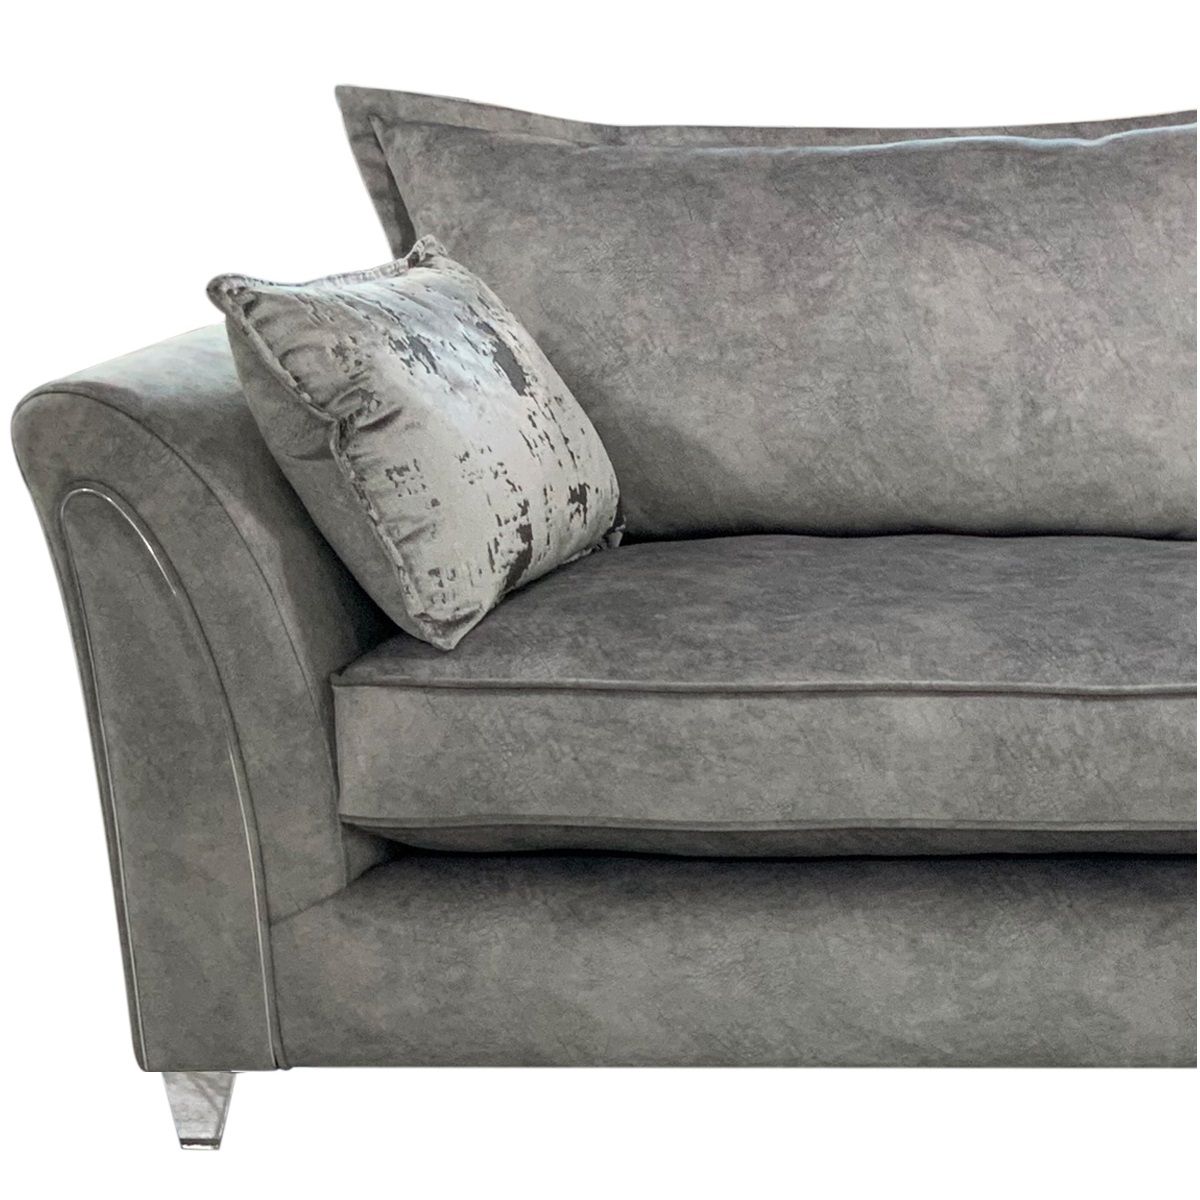 Freya 4 Seater Sofa | It0204273 Intended For Freya Corner Tv Stands (View 13 of 15)